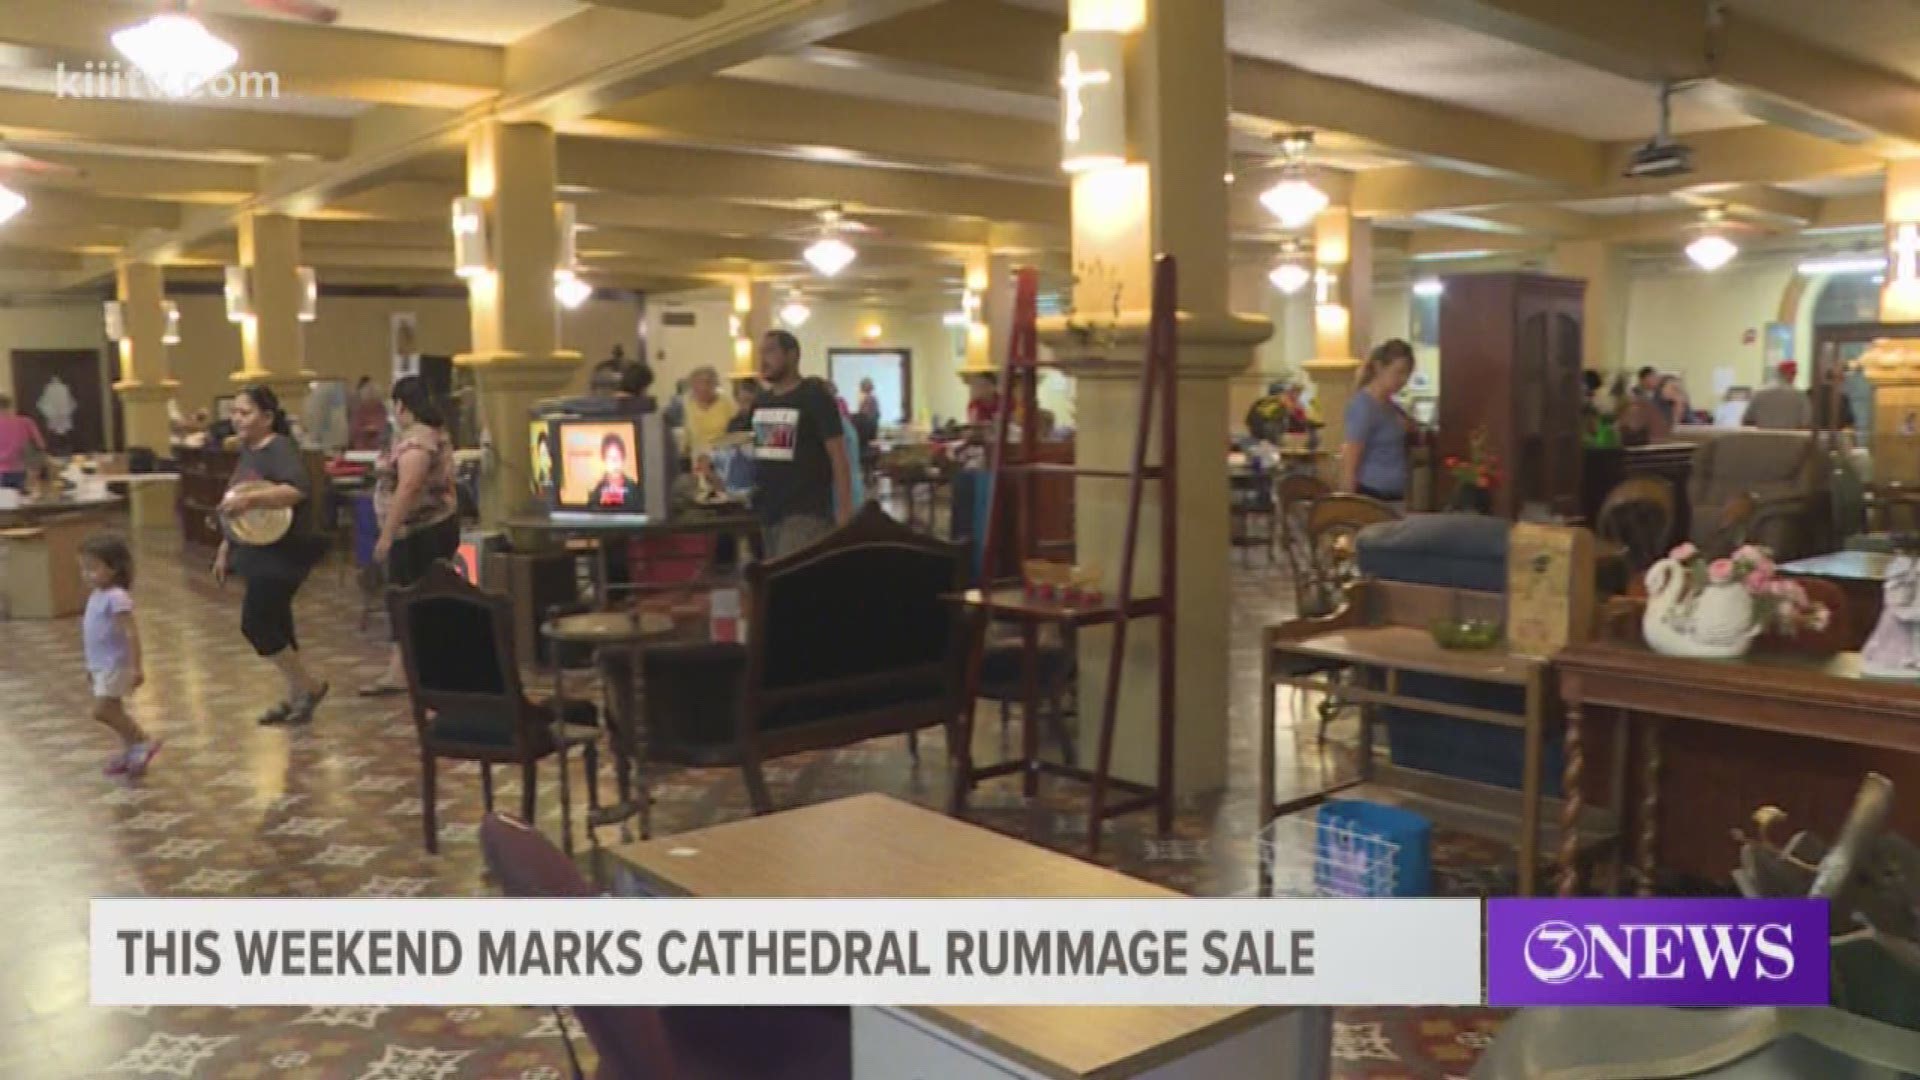 The rummage sale continues Saturday starting at 8 in the morning until 2 p.m. at the Cathedral in Saint Joseph's Hall.